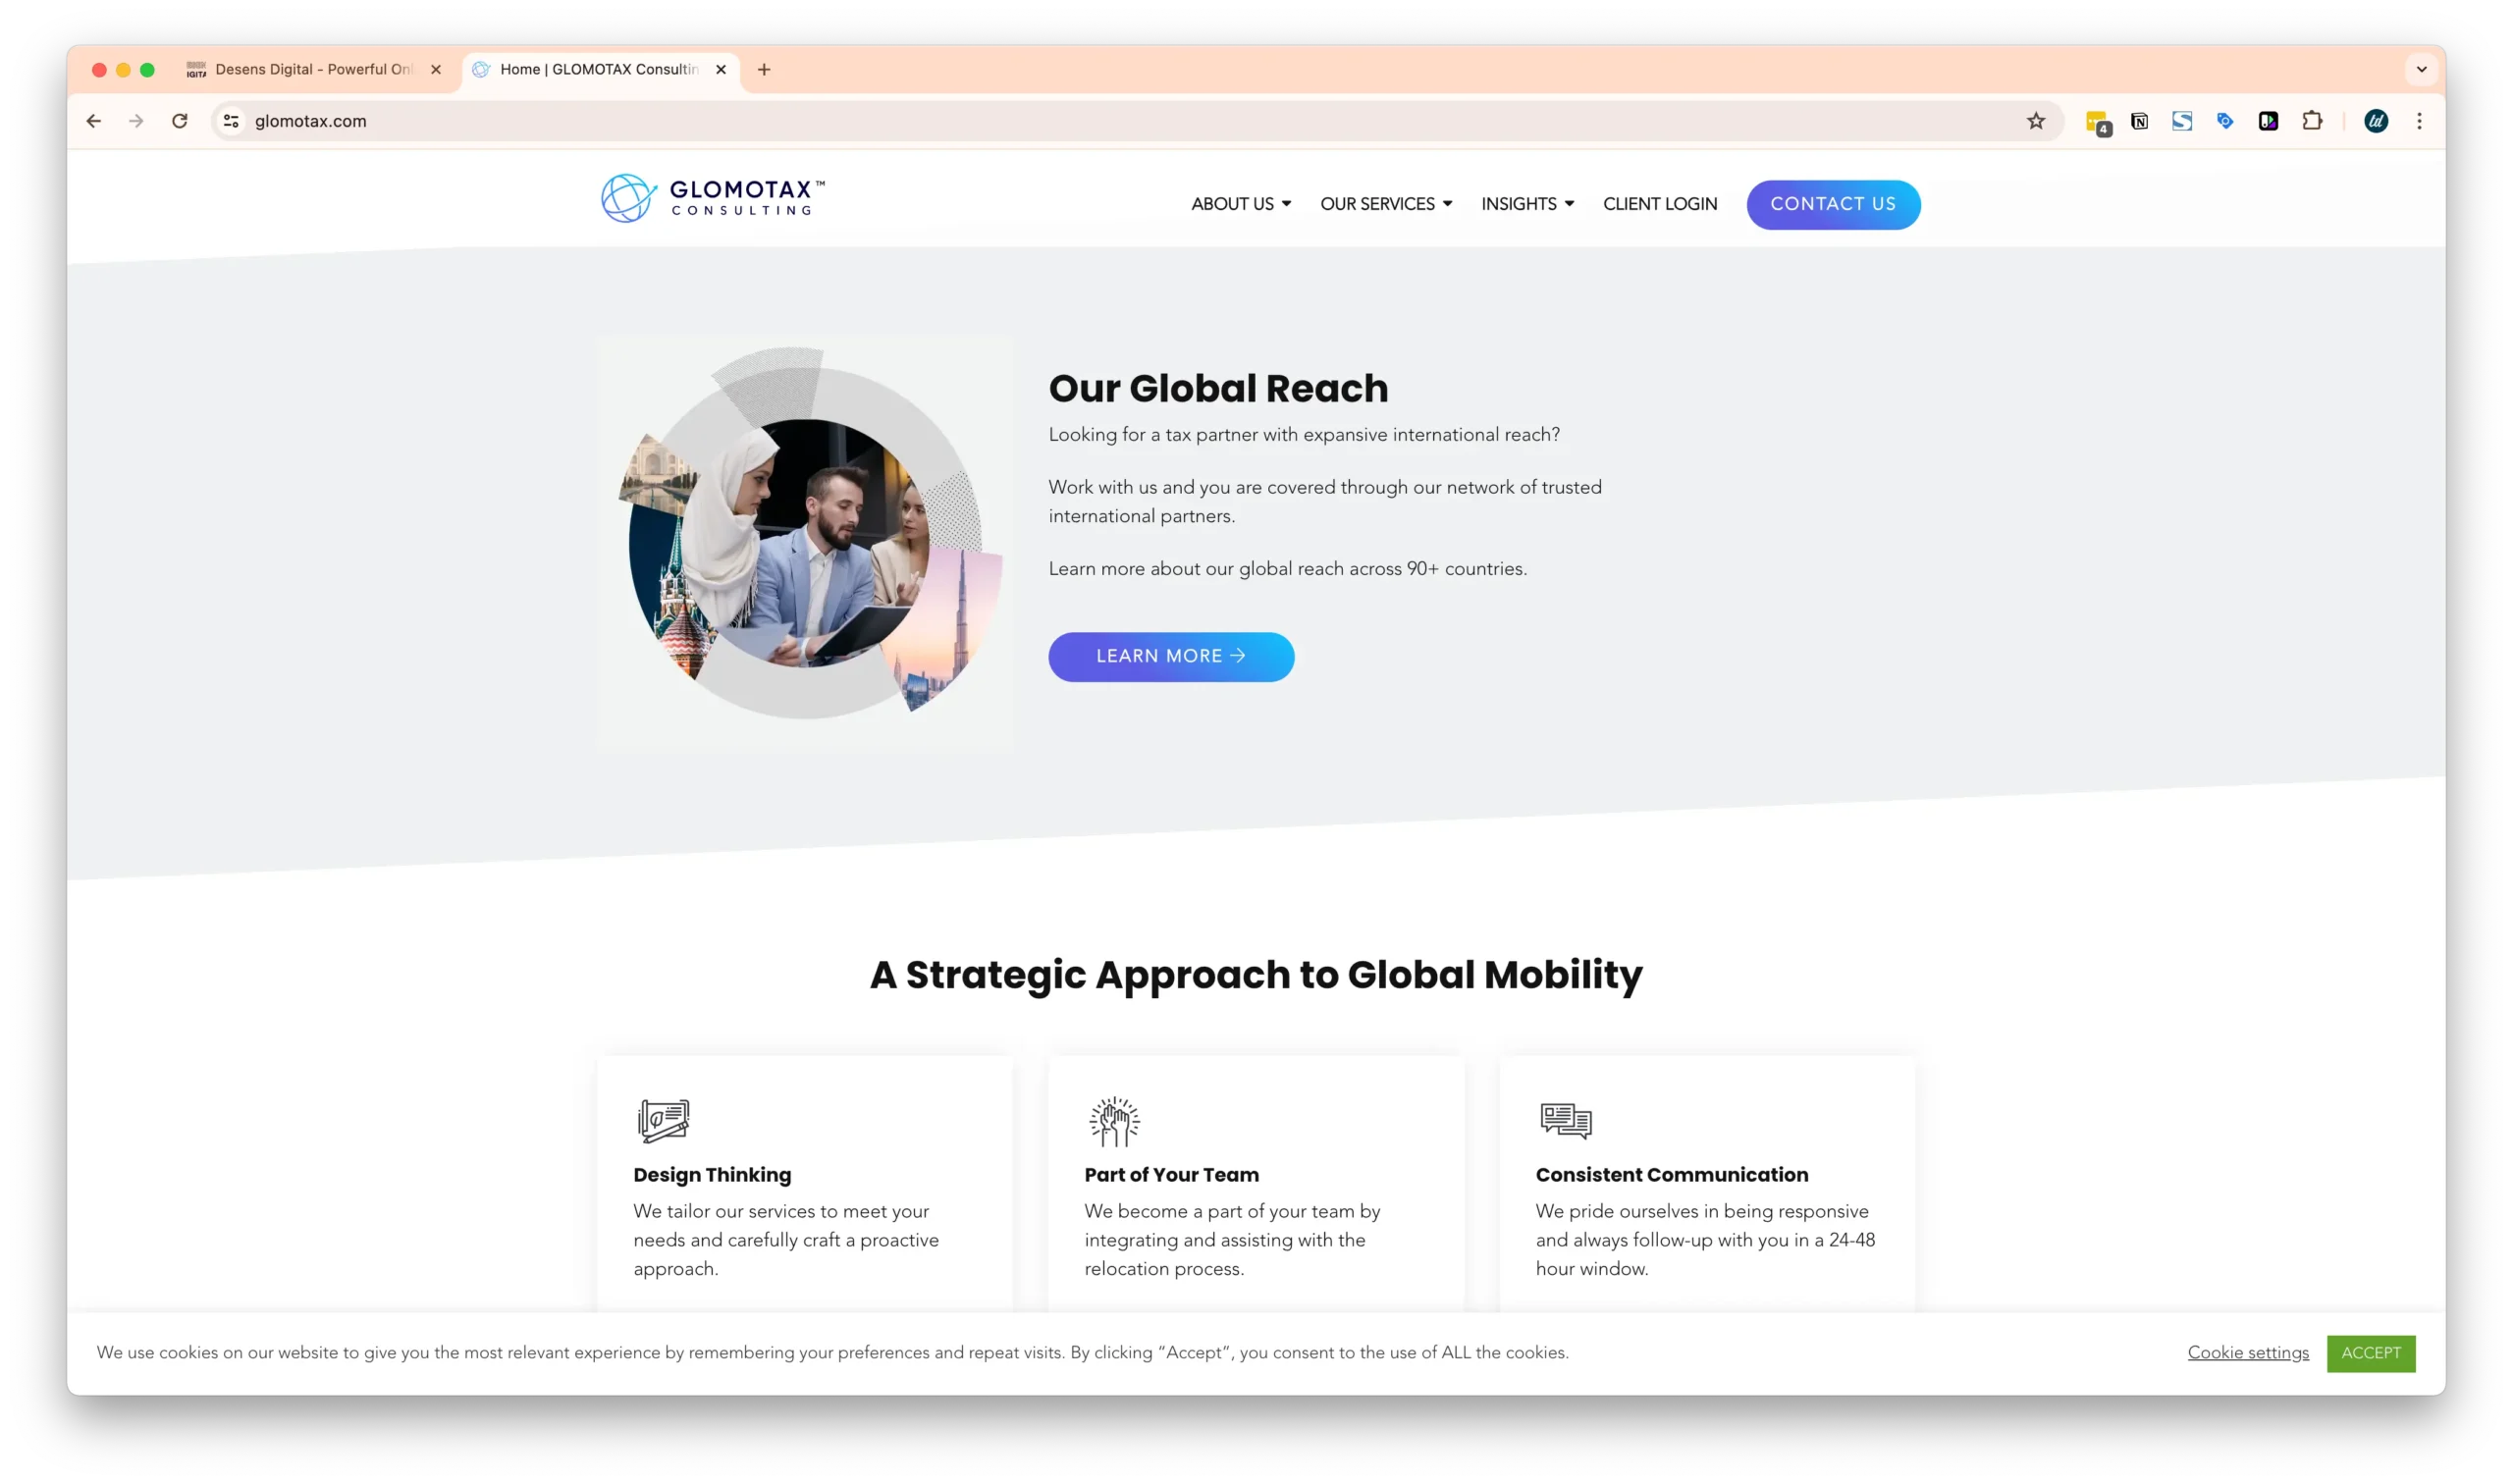 A webpage for Glomotax Consulting, highlighting their global reach in tax services. It features a circular image with three people in a discussion and emphasizes design thinking, team integration, and consistent communication.